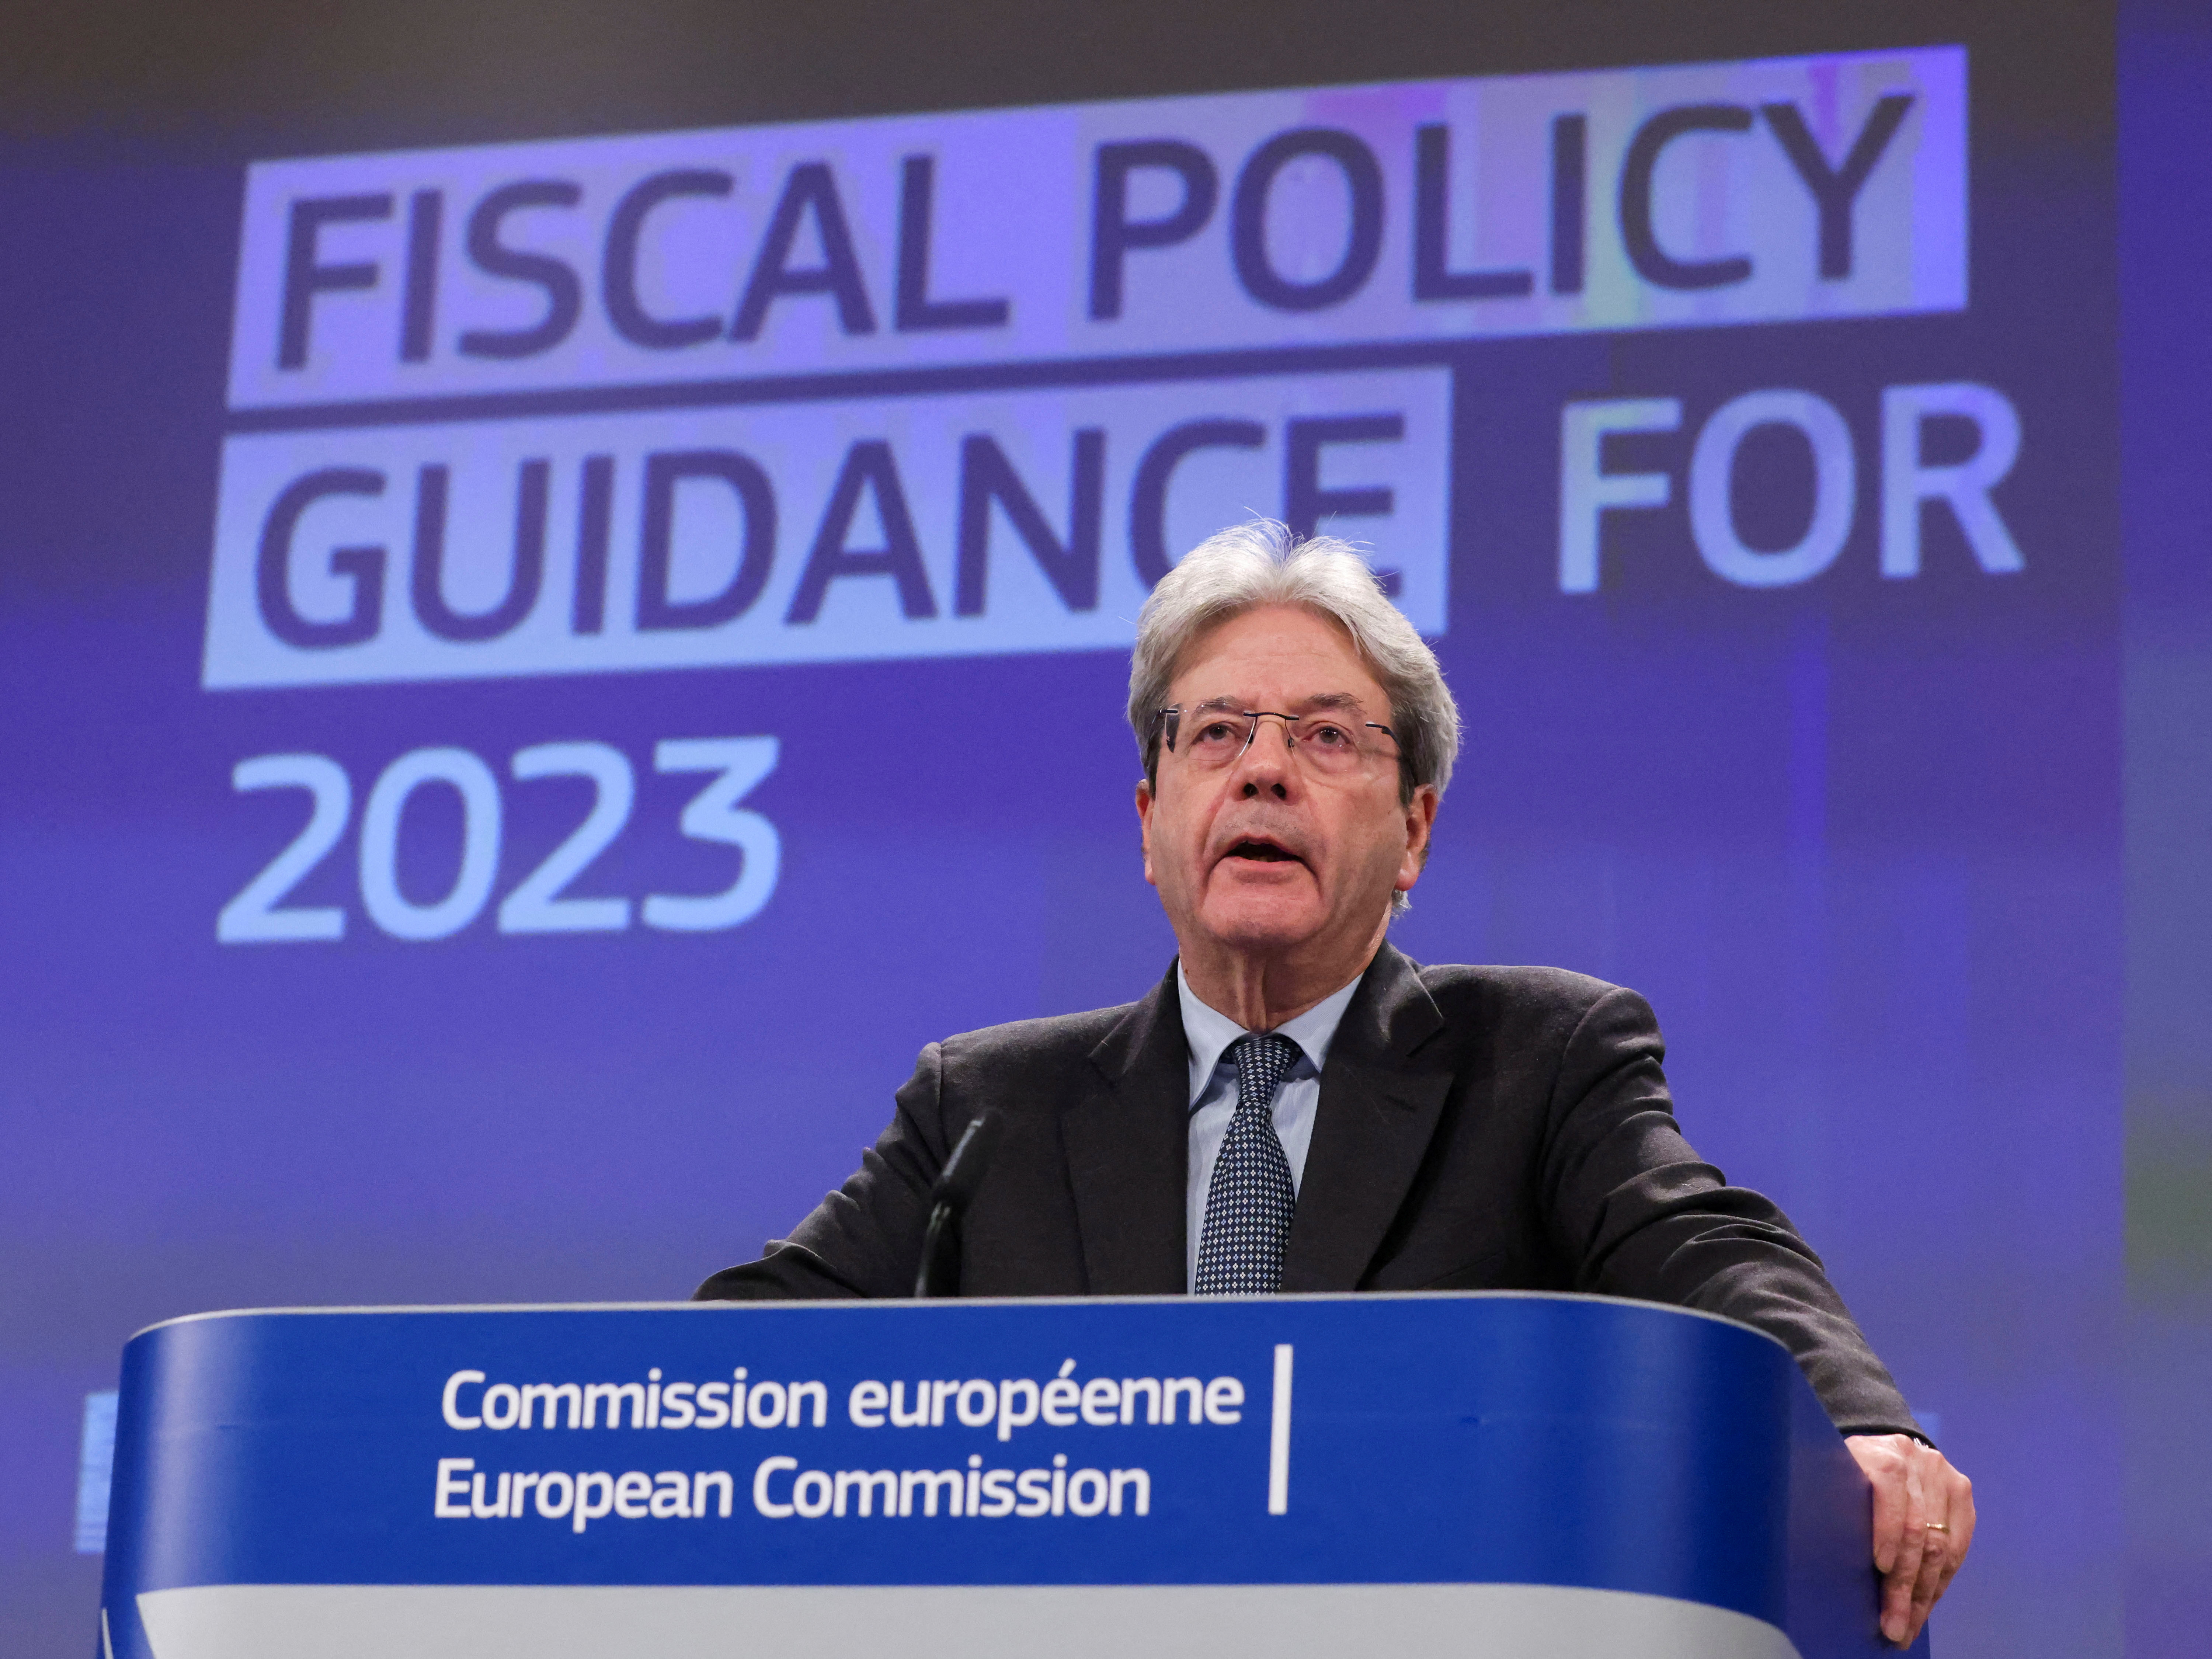 European Commission's Dombrovskis and Gentiloni hold news conference on fiscal guidance for 2023, in Brussels